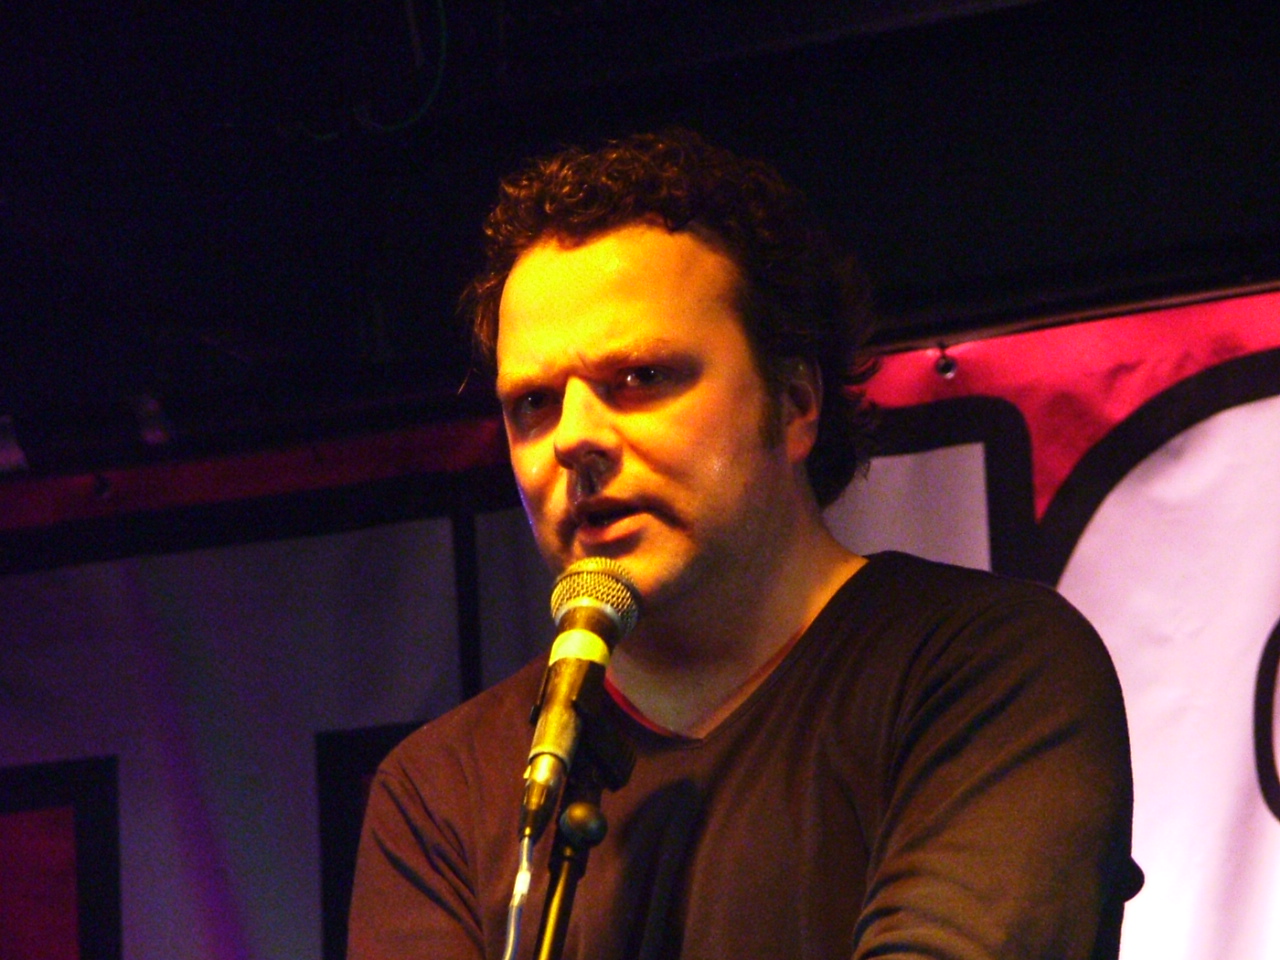 a man is holding a microphone and wearing a brown shirt